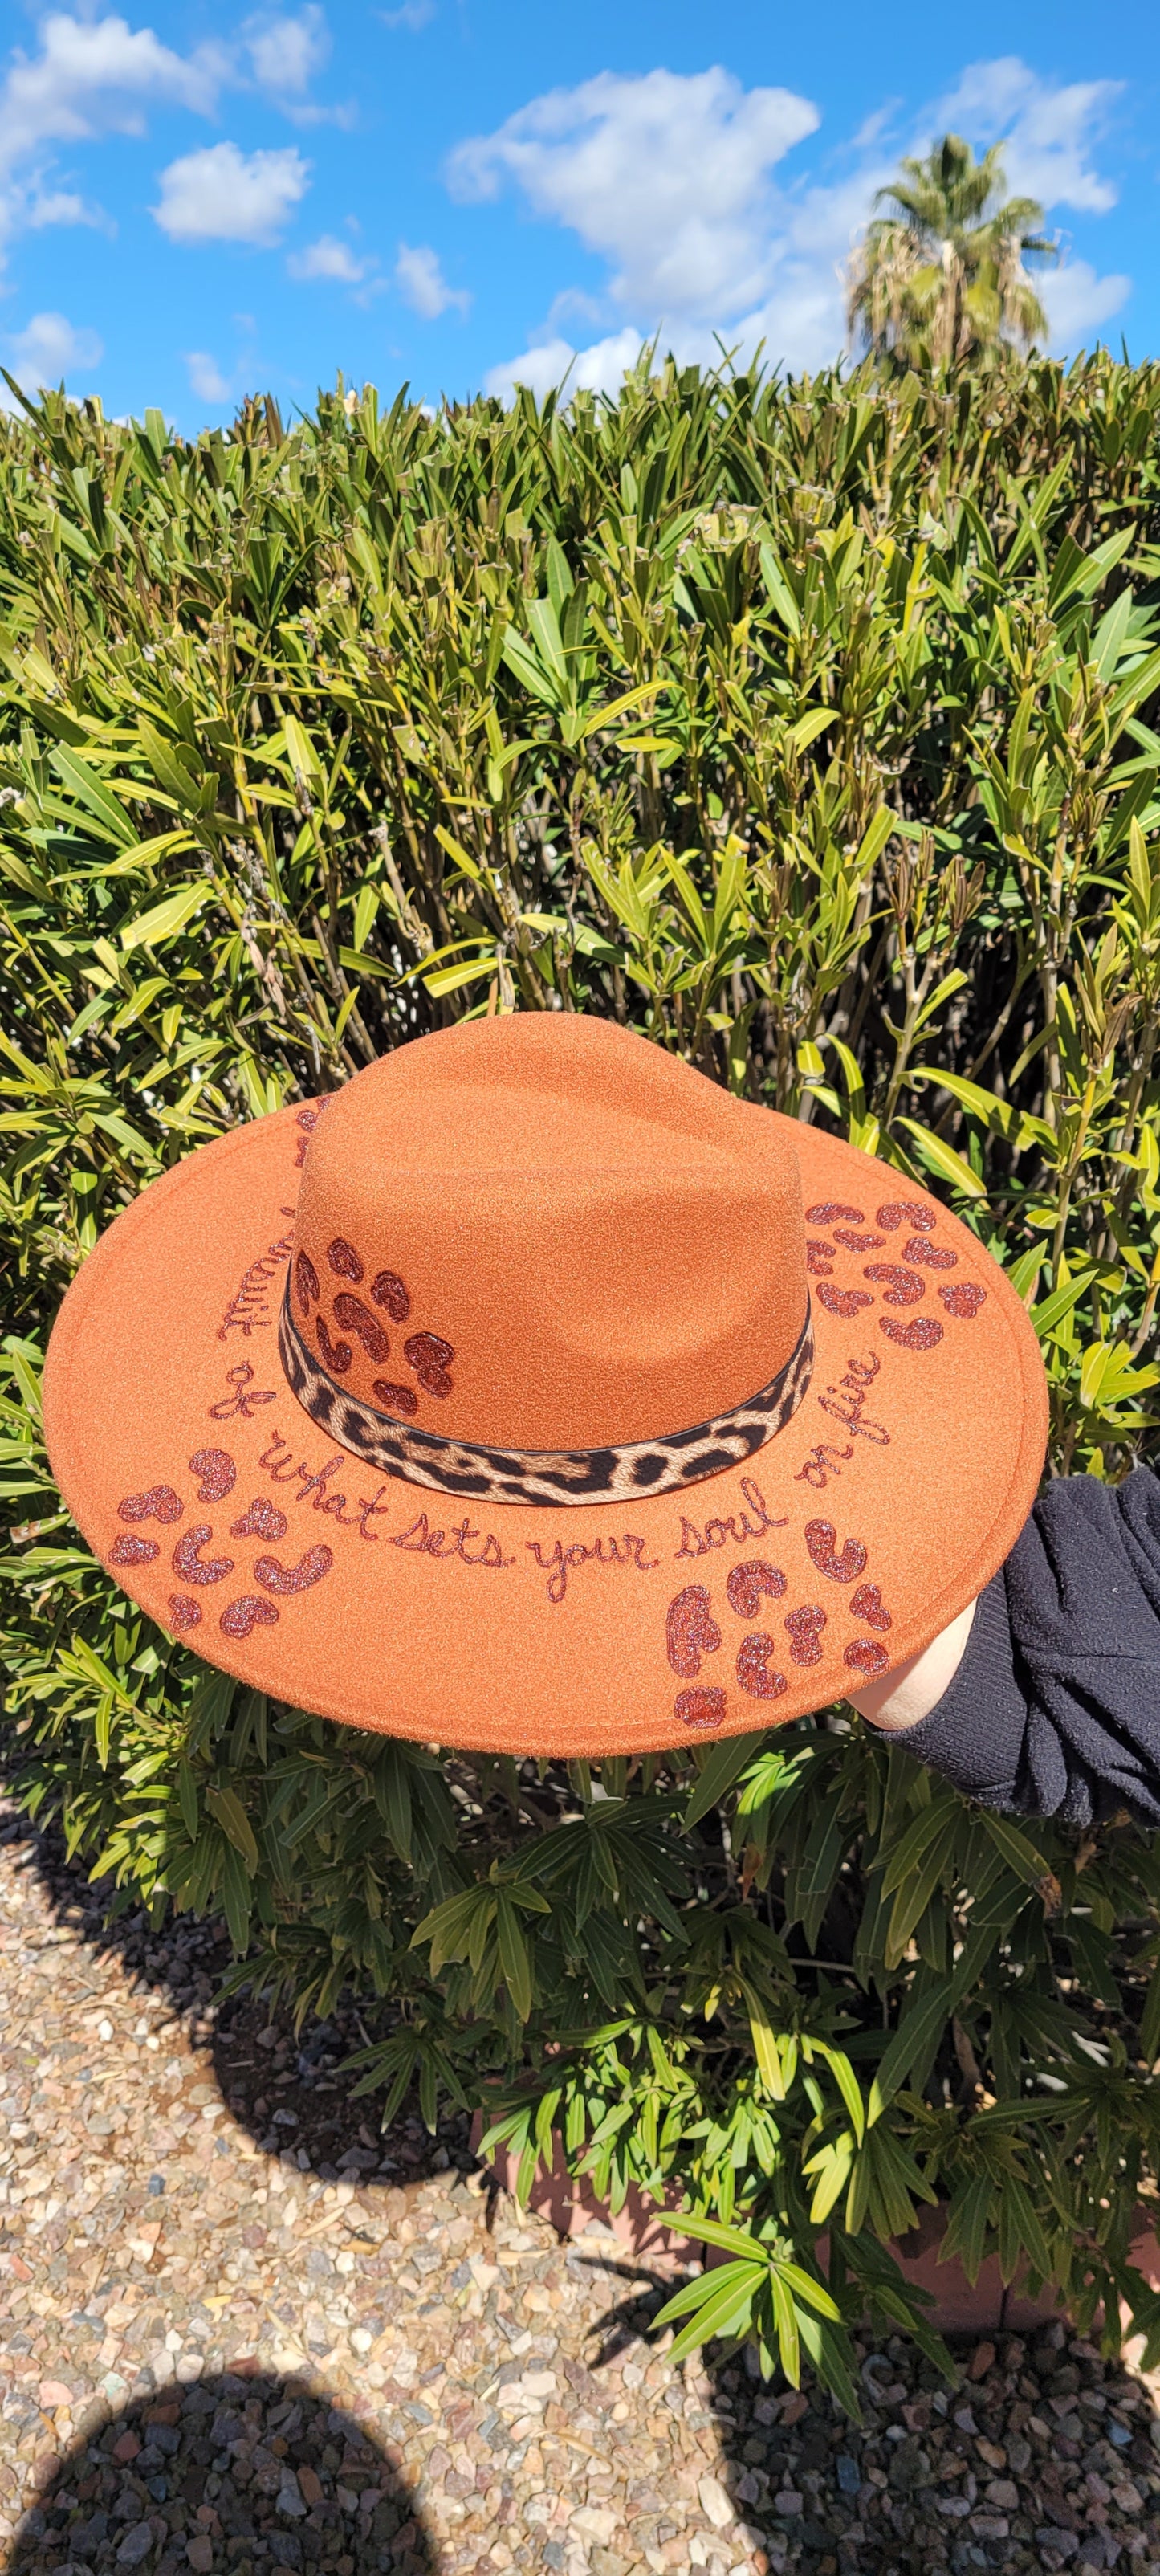 Features brim detailing with leopard print and "be fearless in the pursuit of what sets your soul on fire" engraving Leopard band around brim Felt hat Flat brim 100% polyester Ribbon drawstring for hat size adjustment Head Circumference: 24" Crown Height: 5" Brim Length: 15.75" Brim Width: 14.5" Branded & numbered inside crown Custom engraved by Kayla